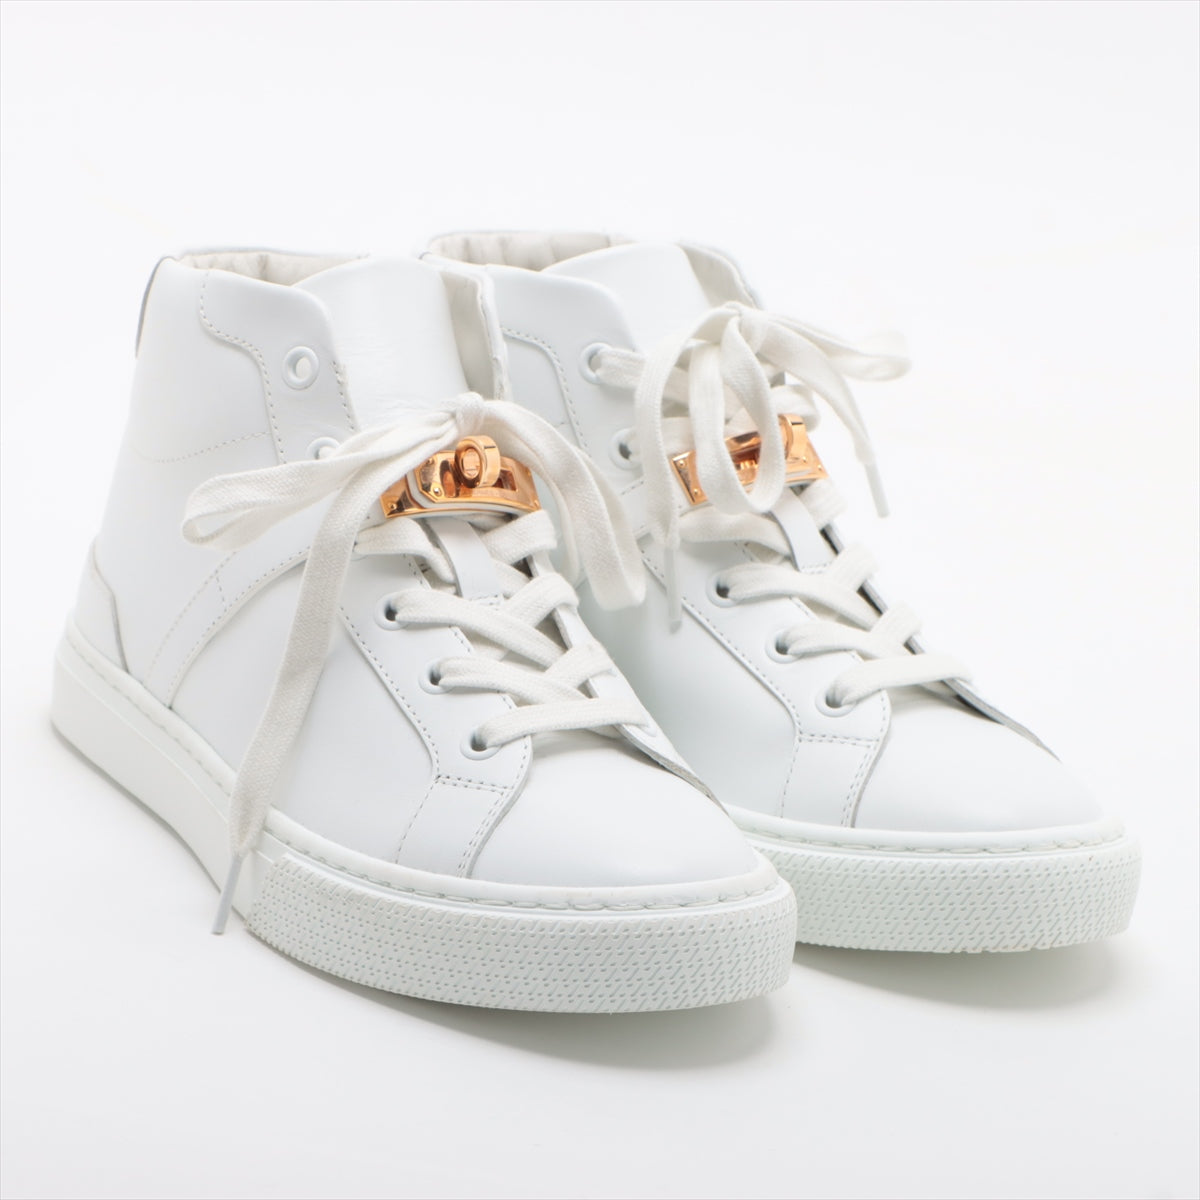 Hermès daydream Leather Sneakers 36 Ladies' White Kelly metal fittings box sack Is there a replacement string